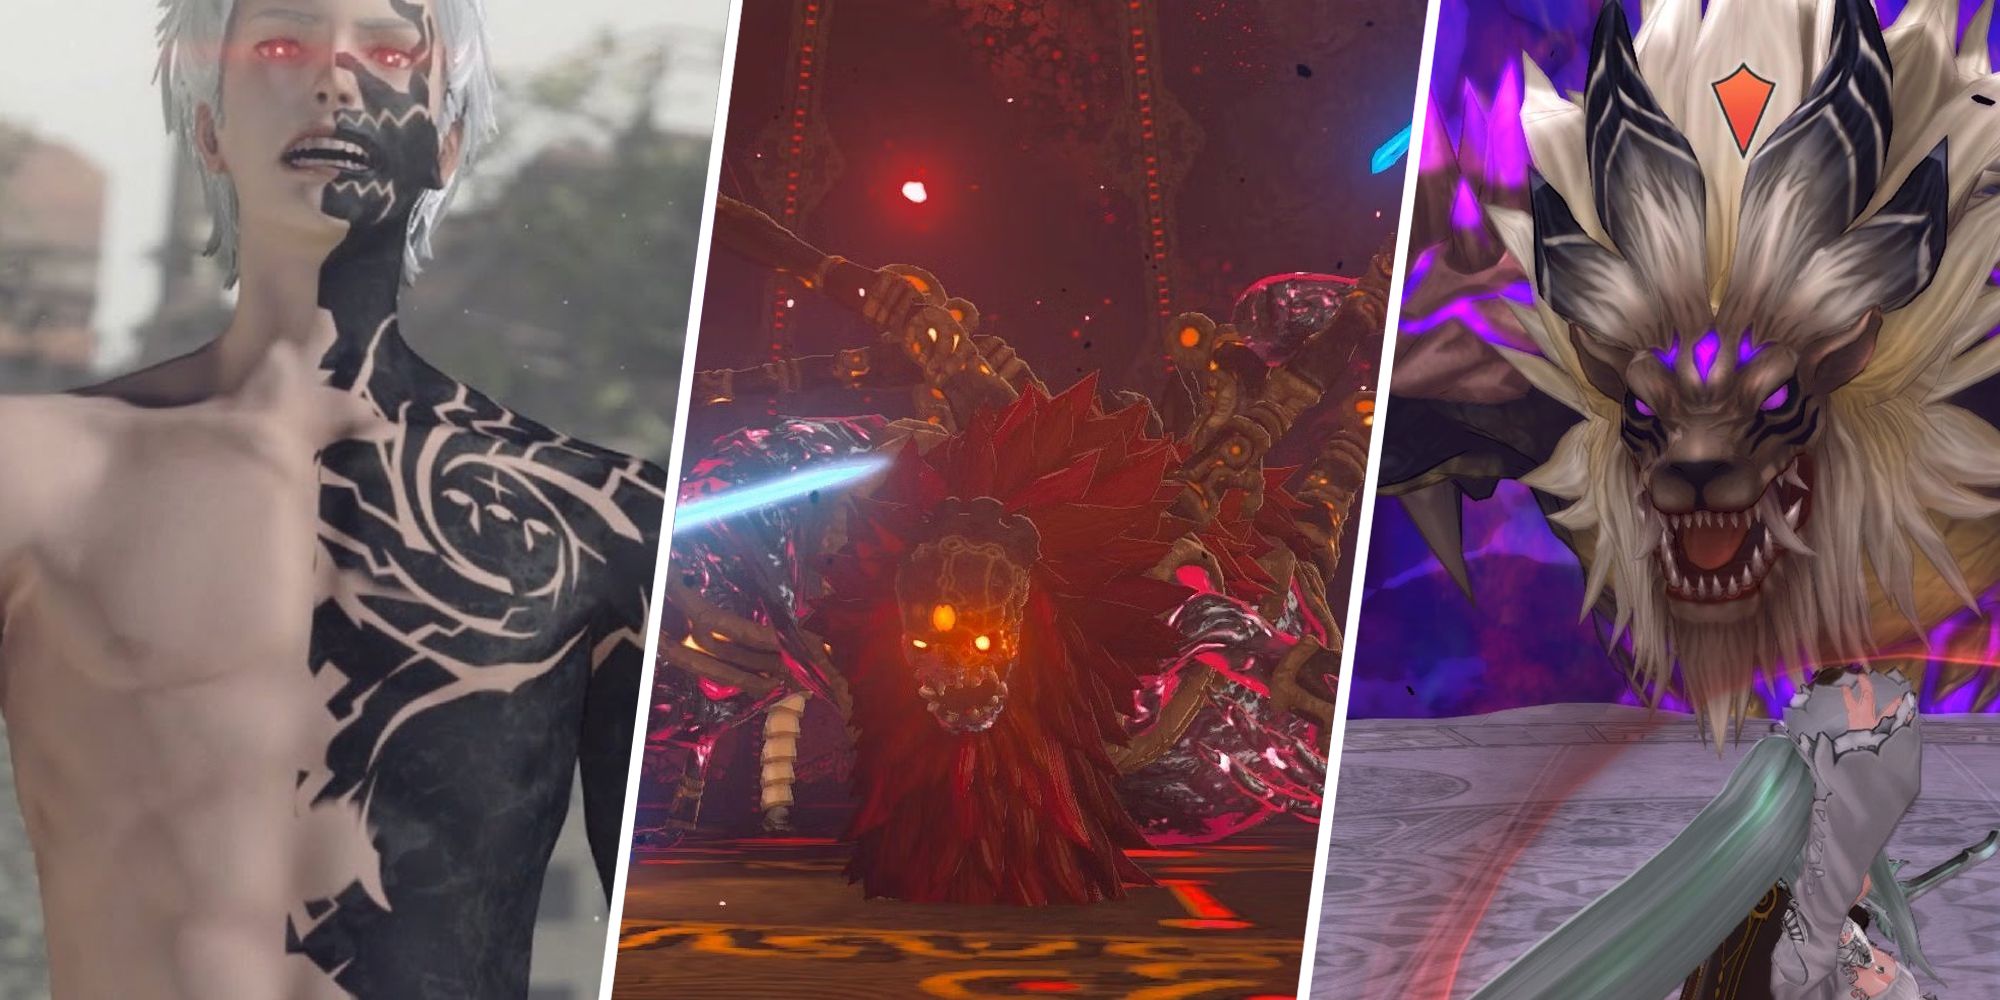 Eve in NieR: Automata, Calamity Ganon in Breath of the Wild, and Haldalf in Tales of Zestiria